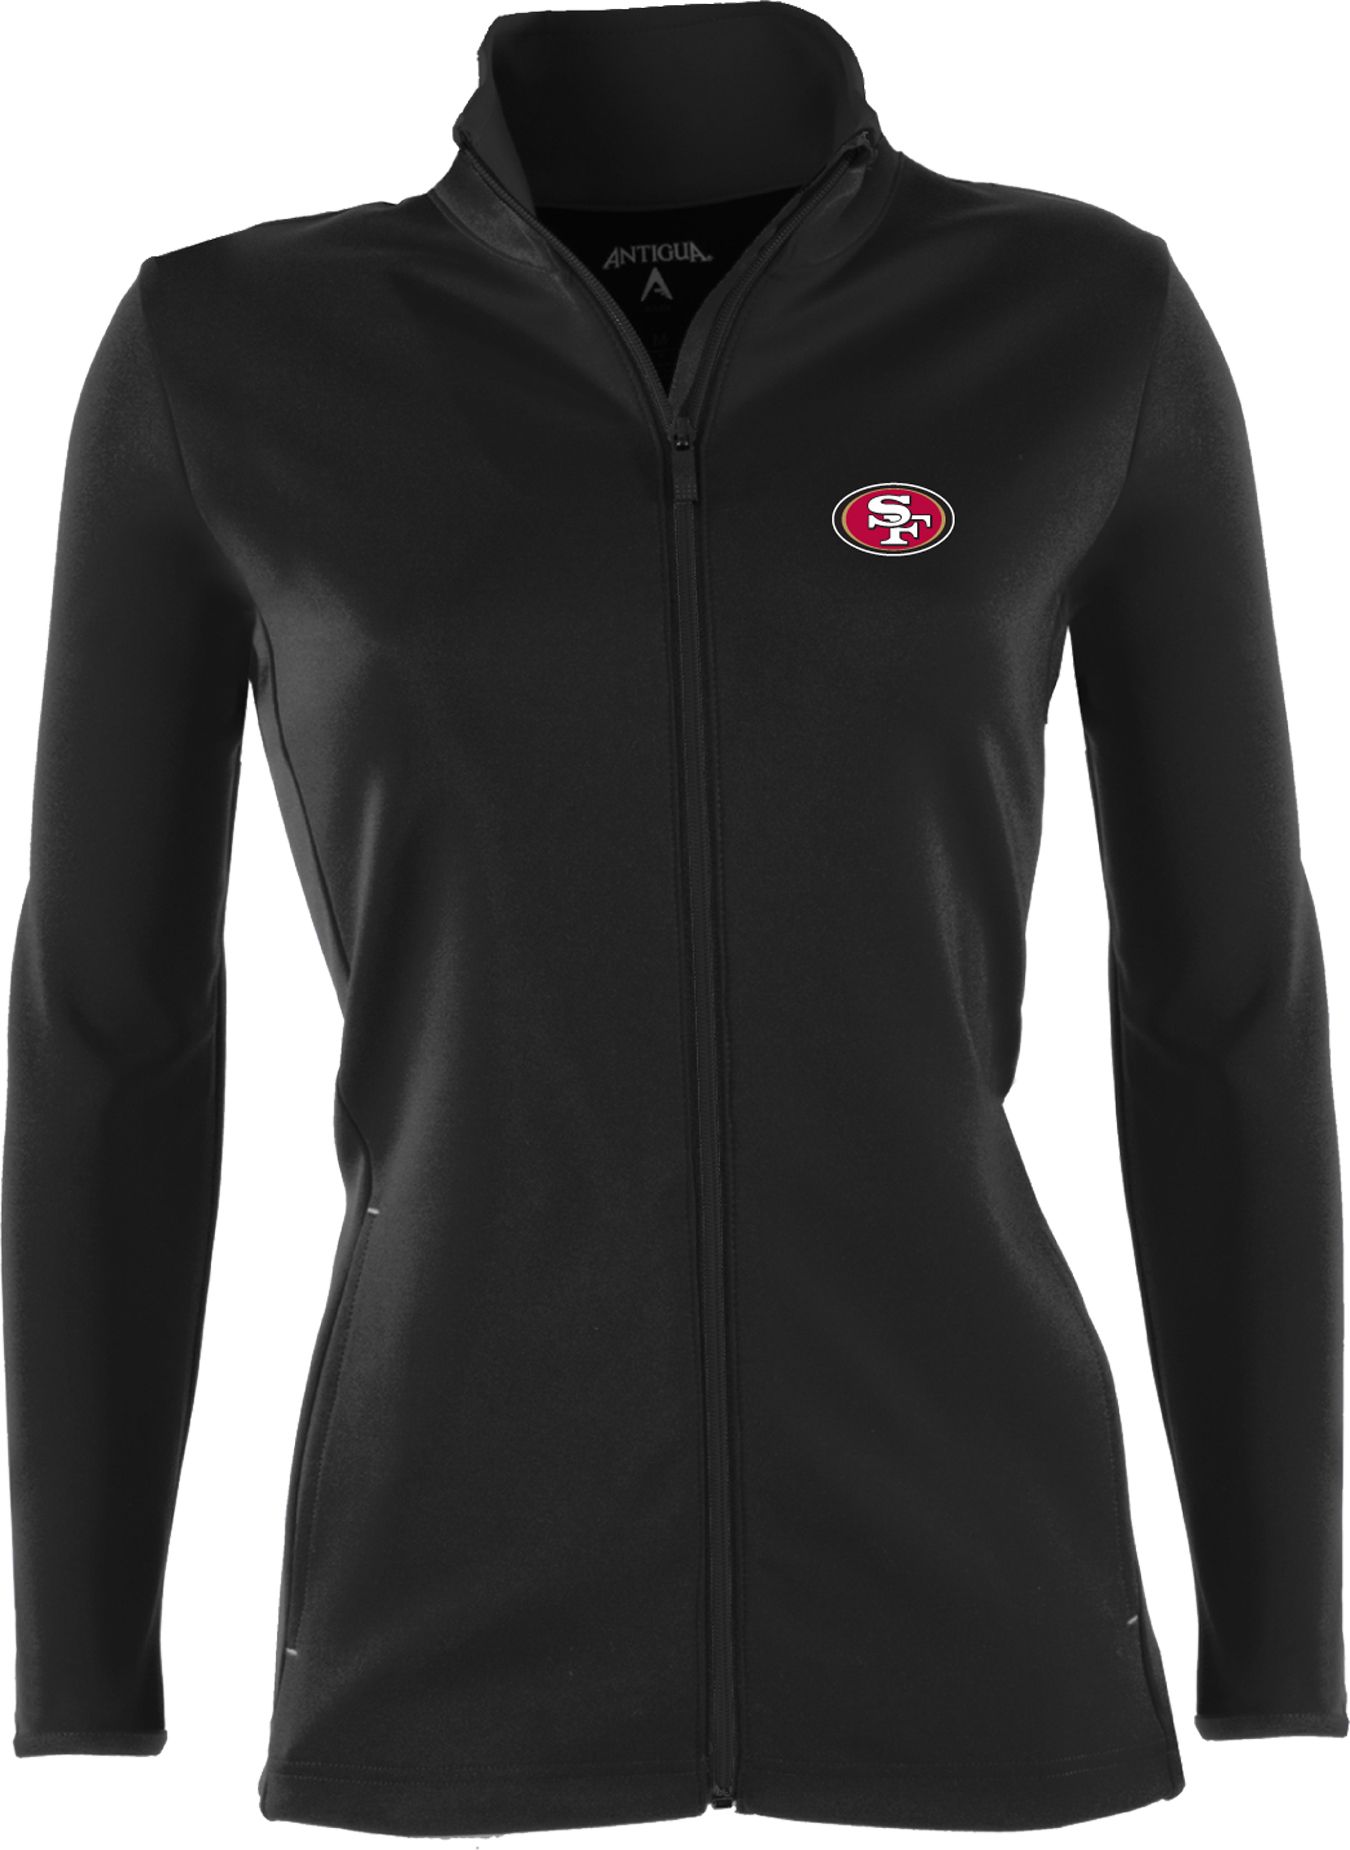 49ers apparel for women